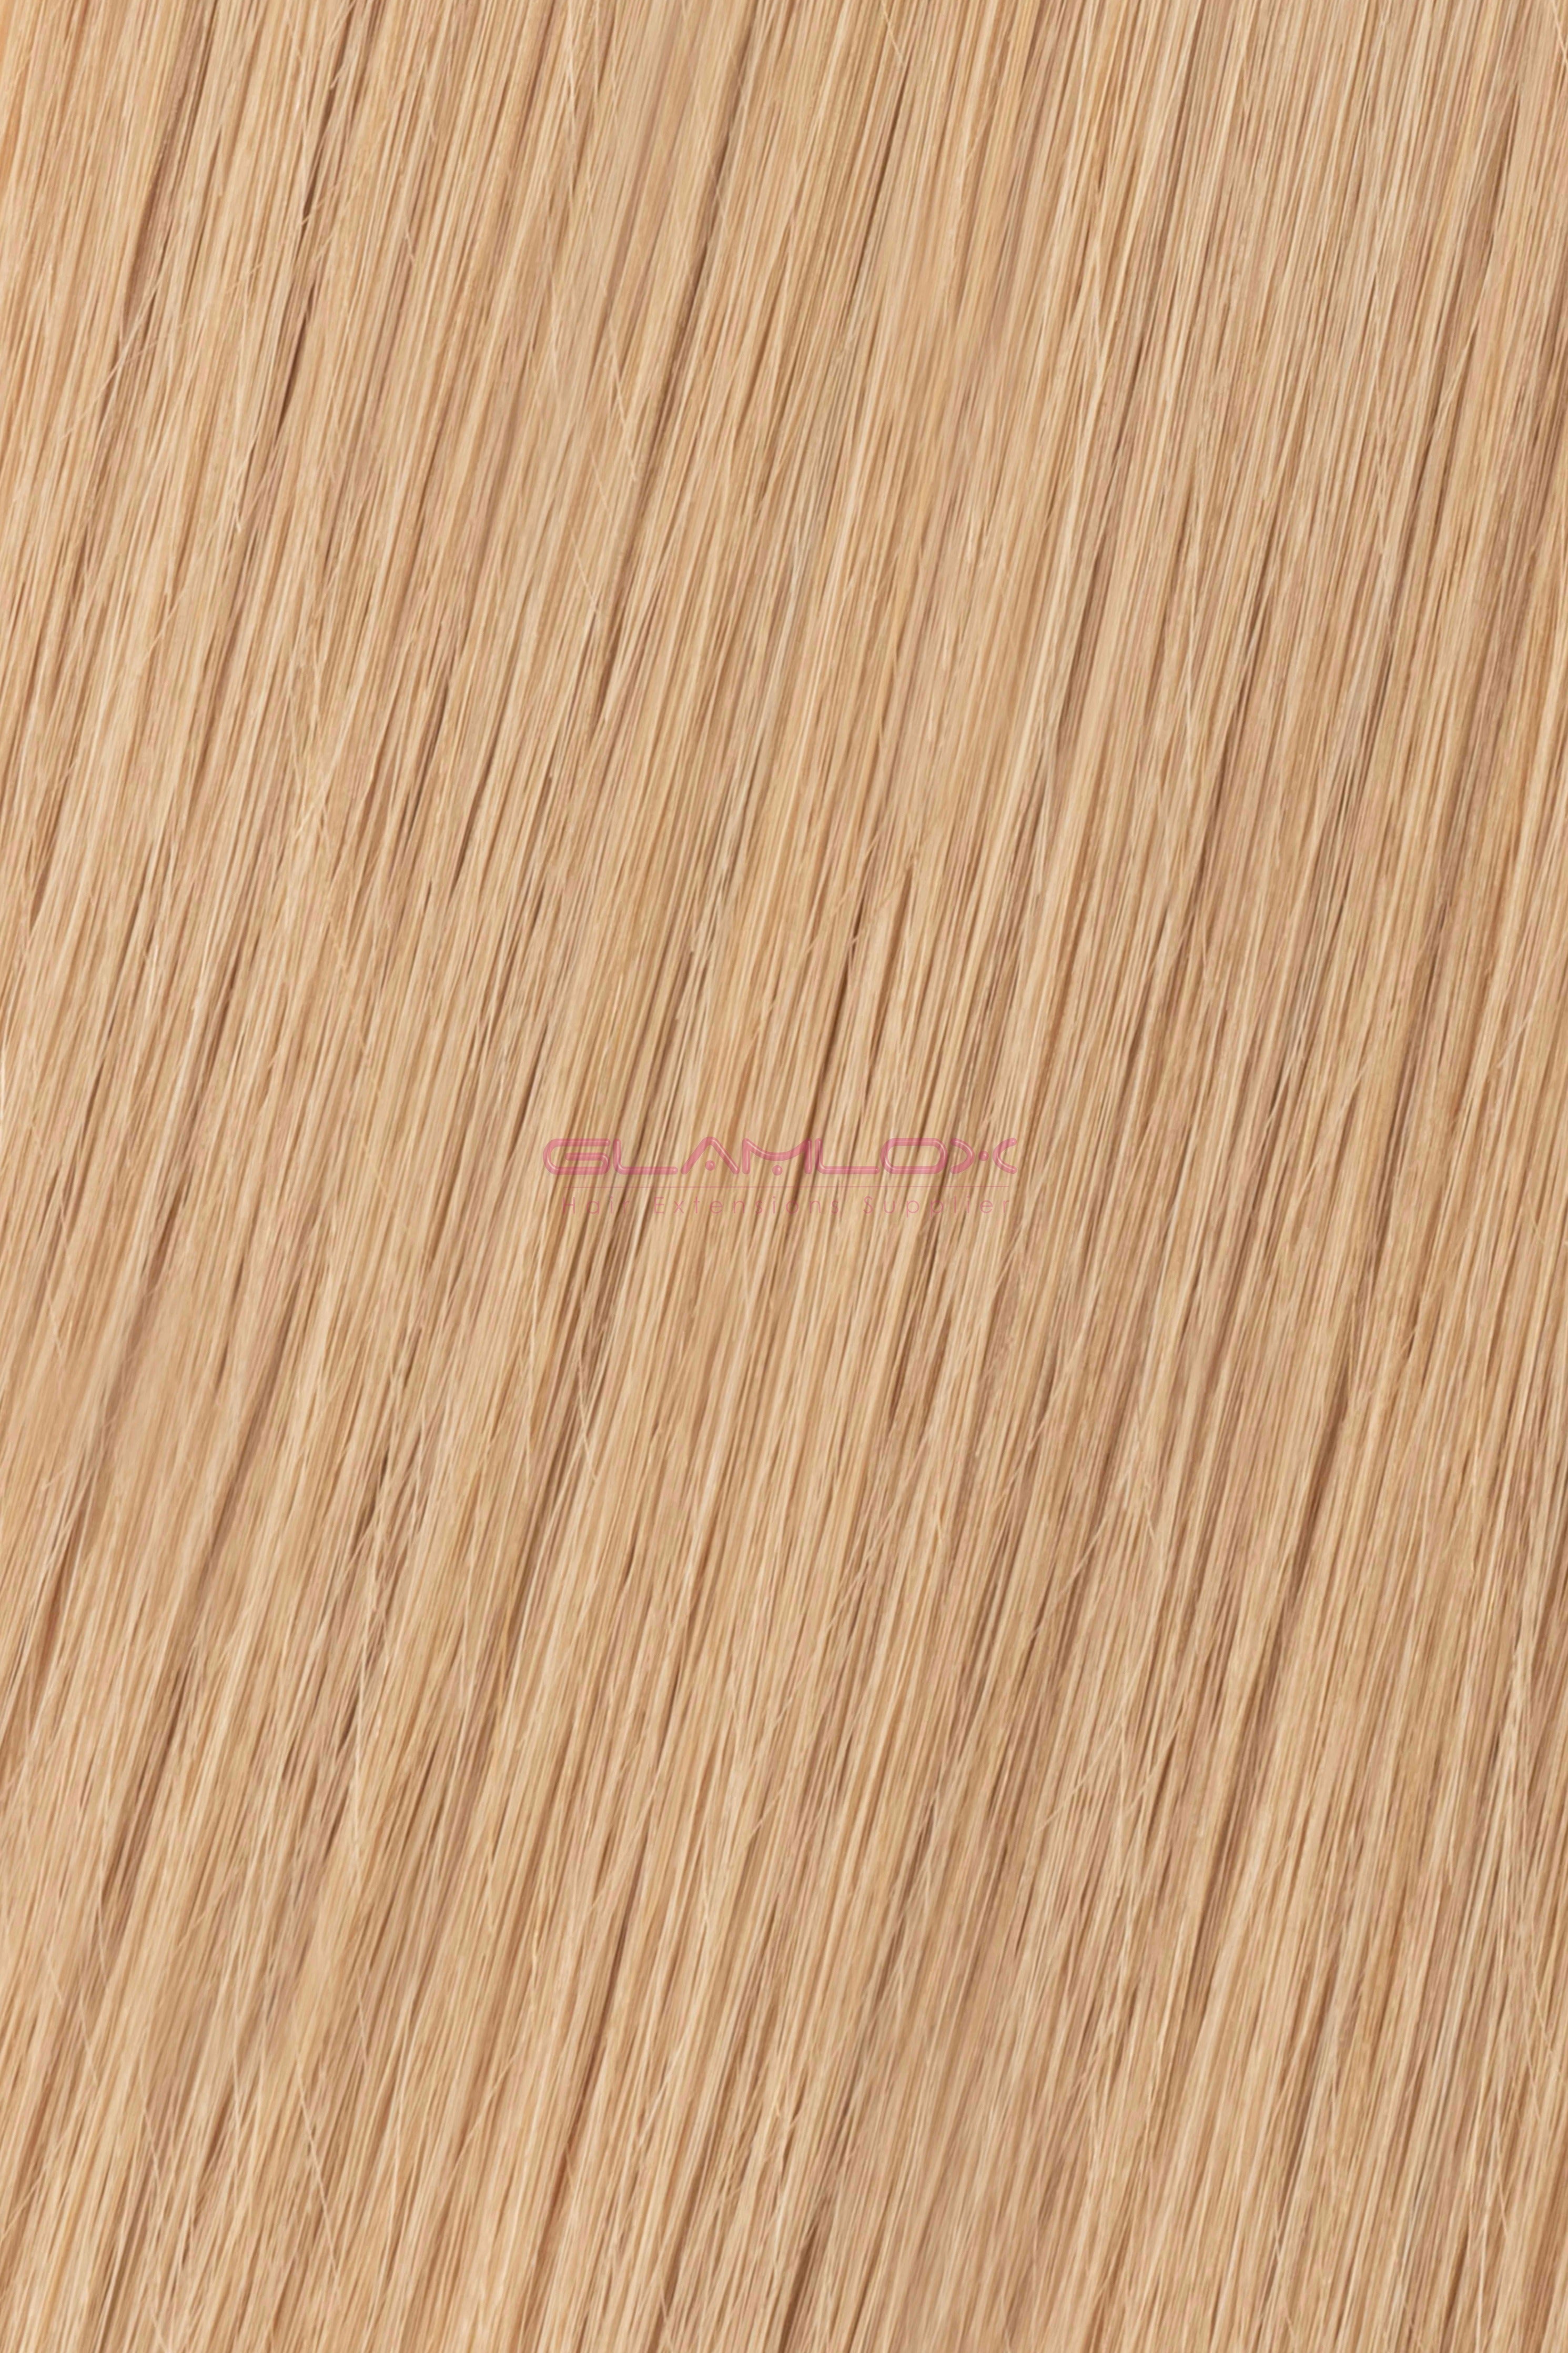 16" - Tape In Hair Extensions - Russian Mongolian Double Drawn Remy Human Hair Extensions